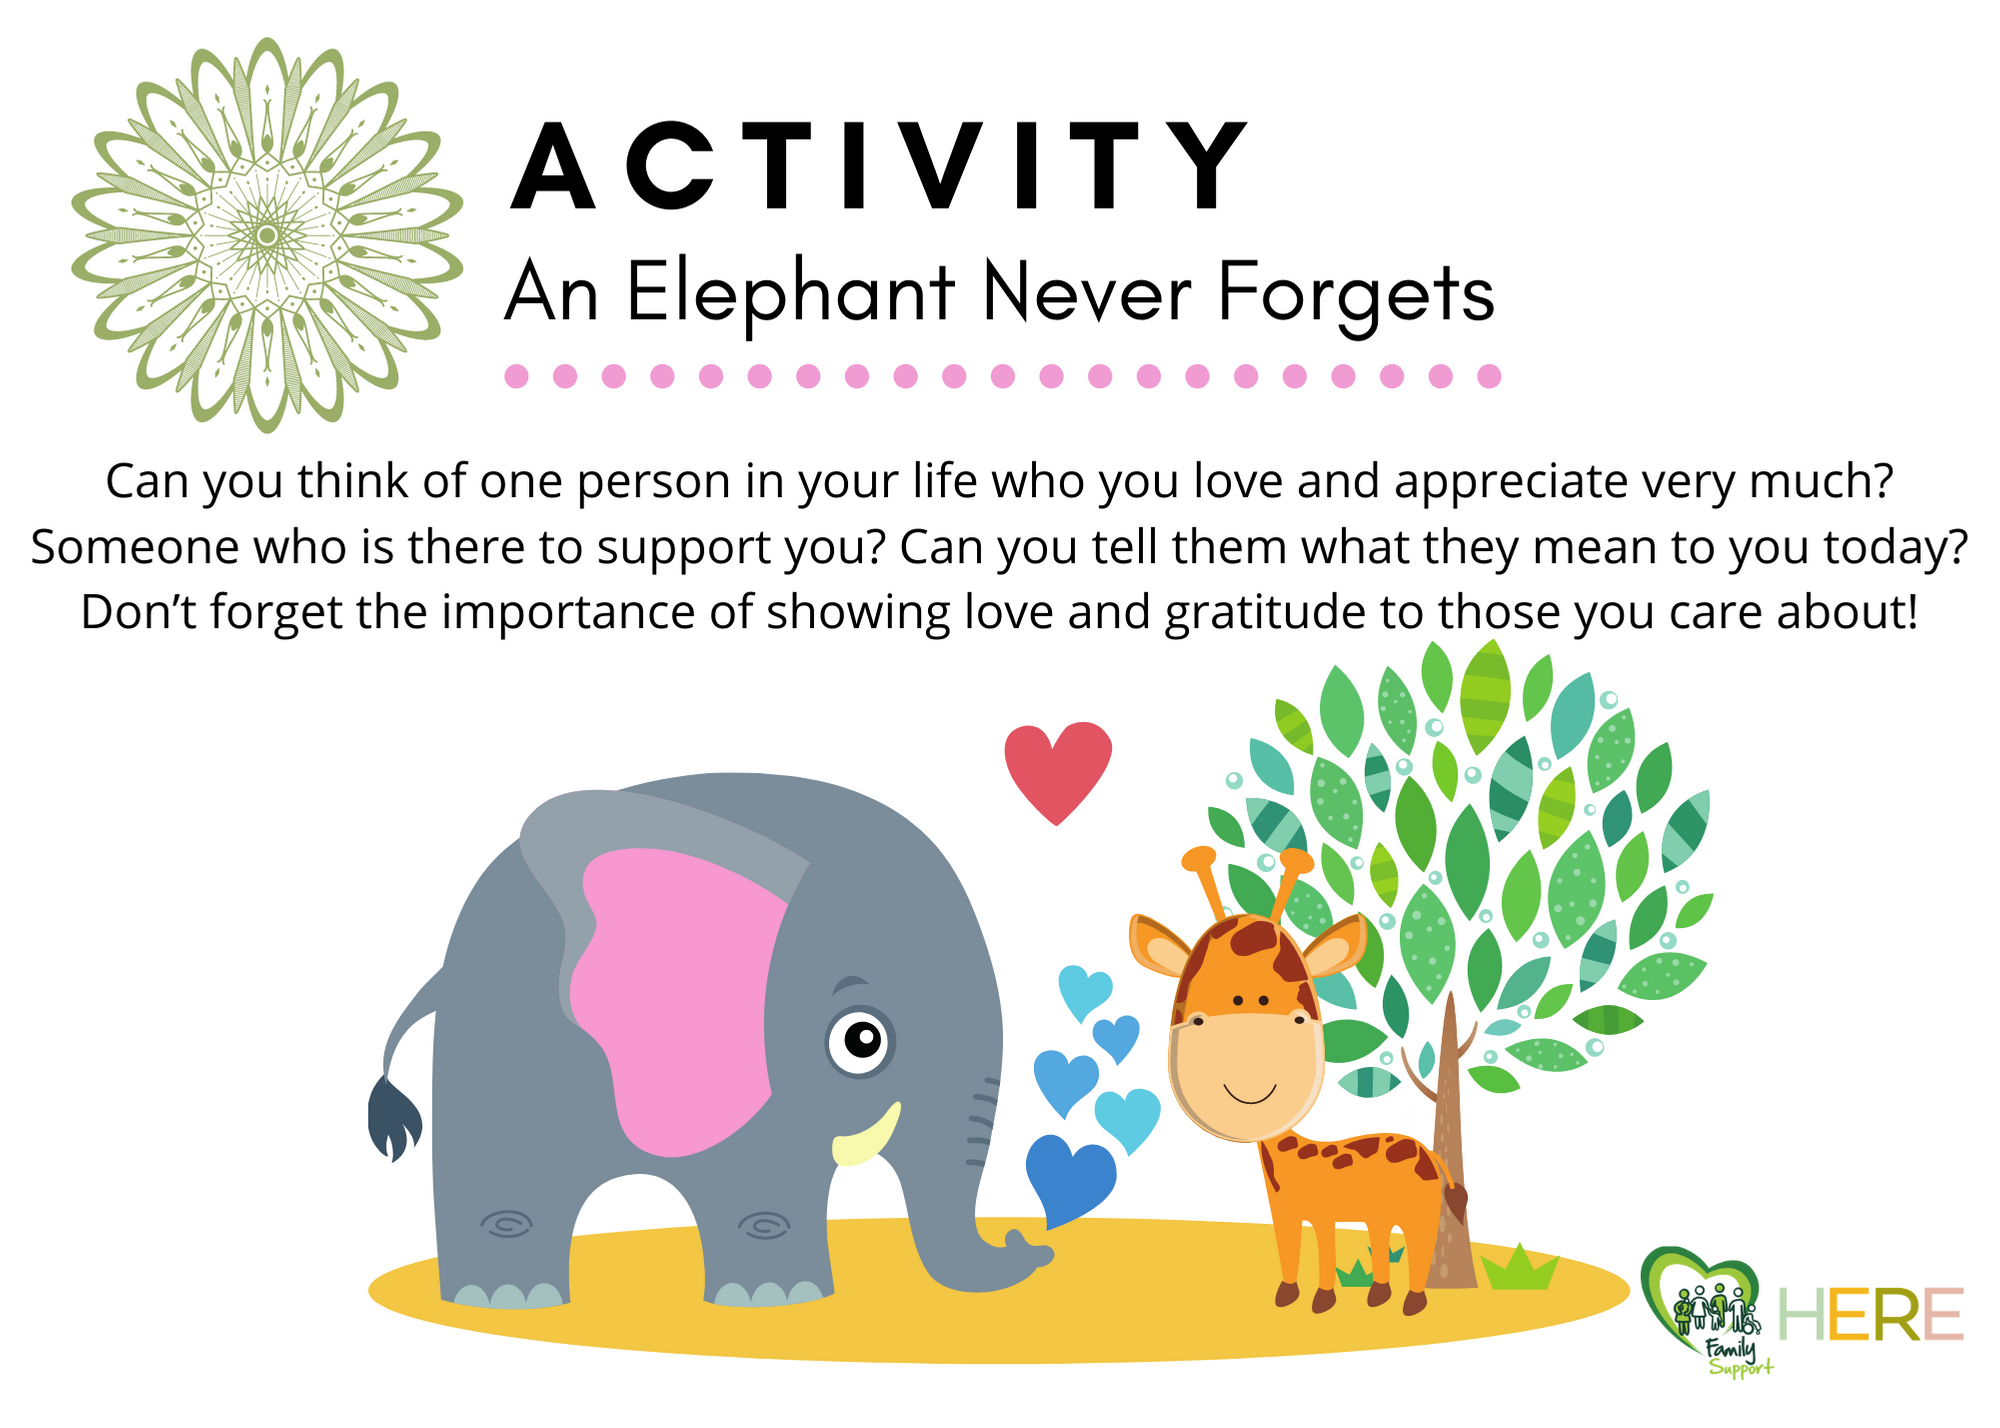 Activity An Elephant Never Forgets.png